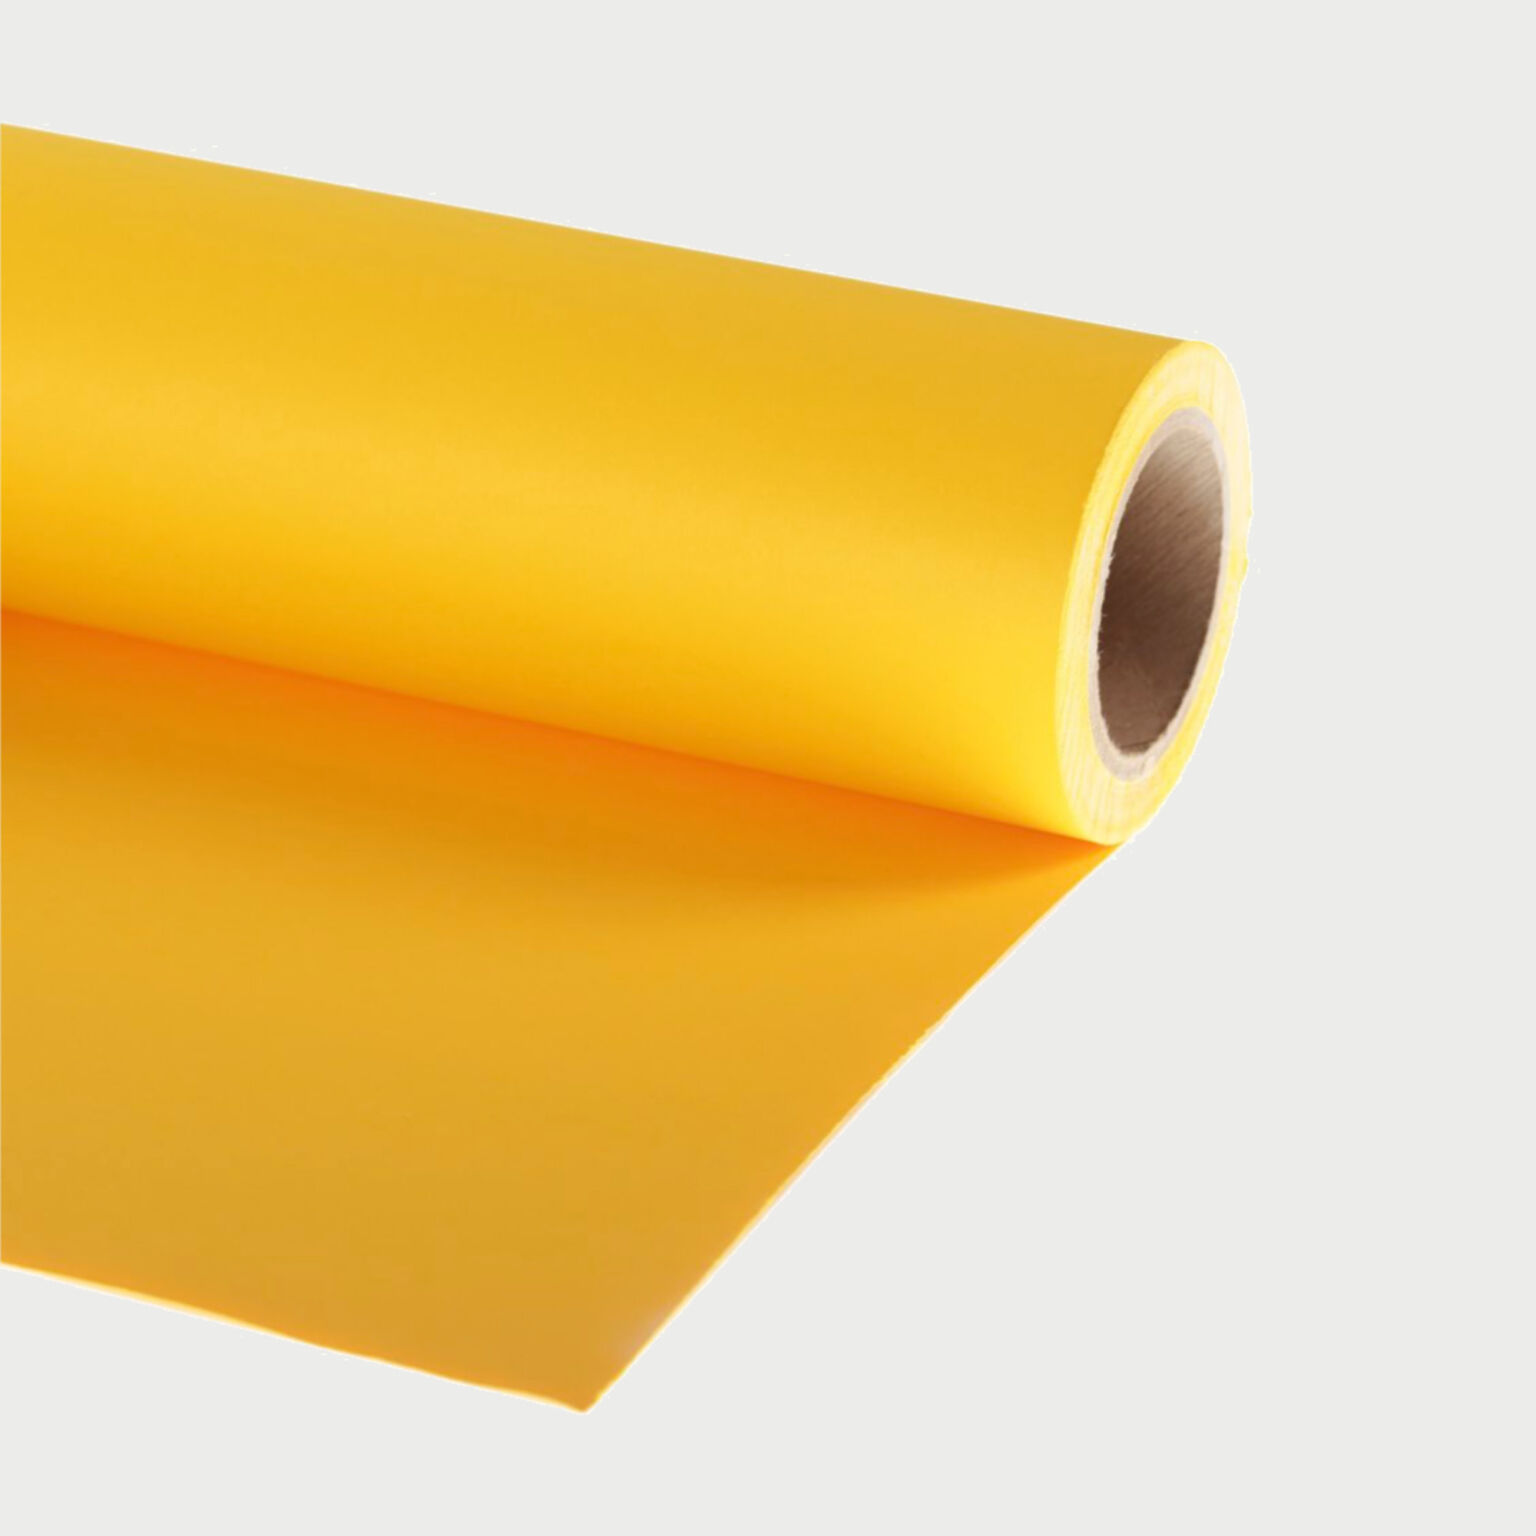 Manfrotto Paper Yellow Seamless Background Paper 2 72m X 11m